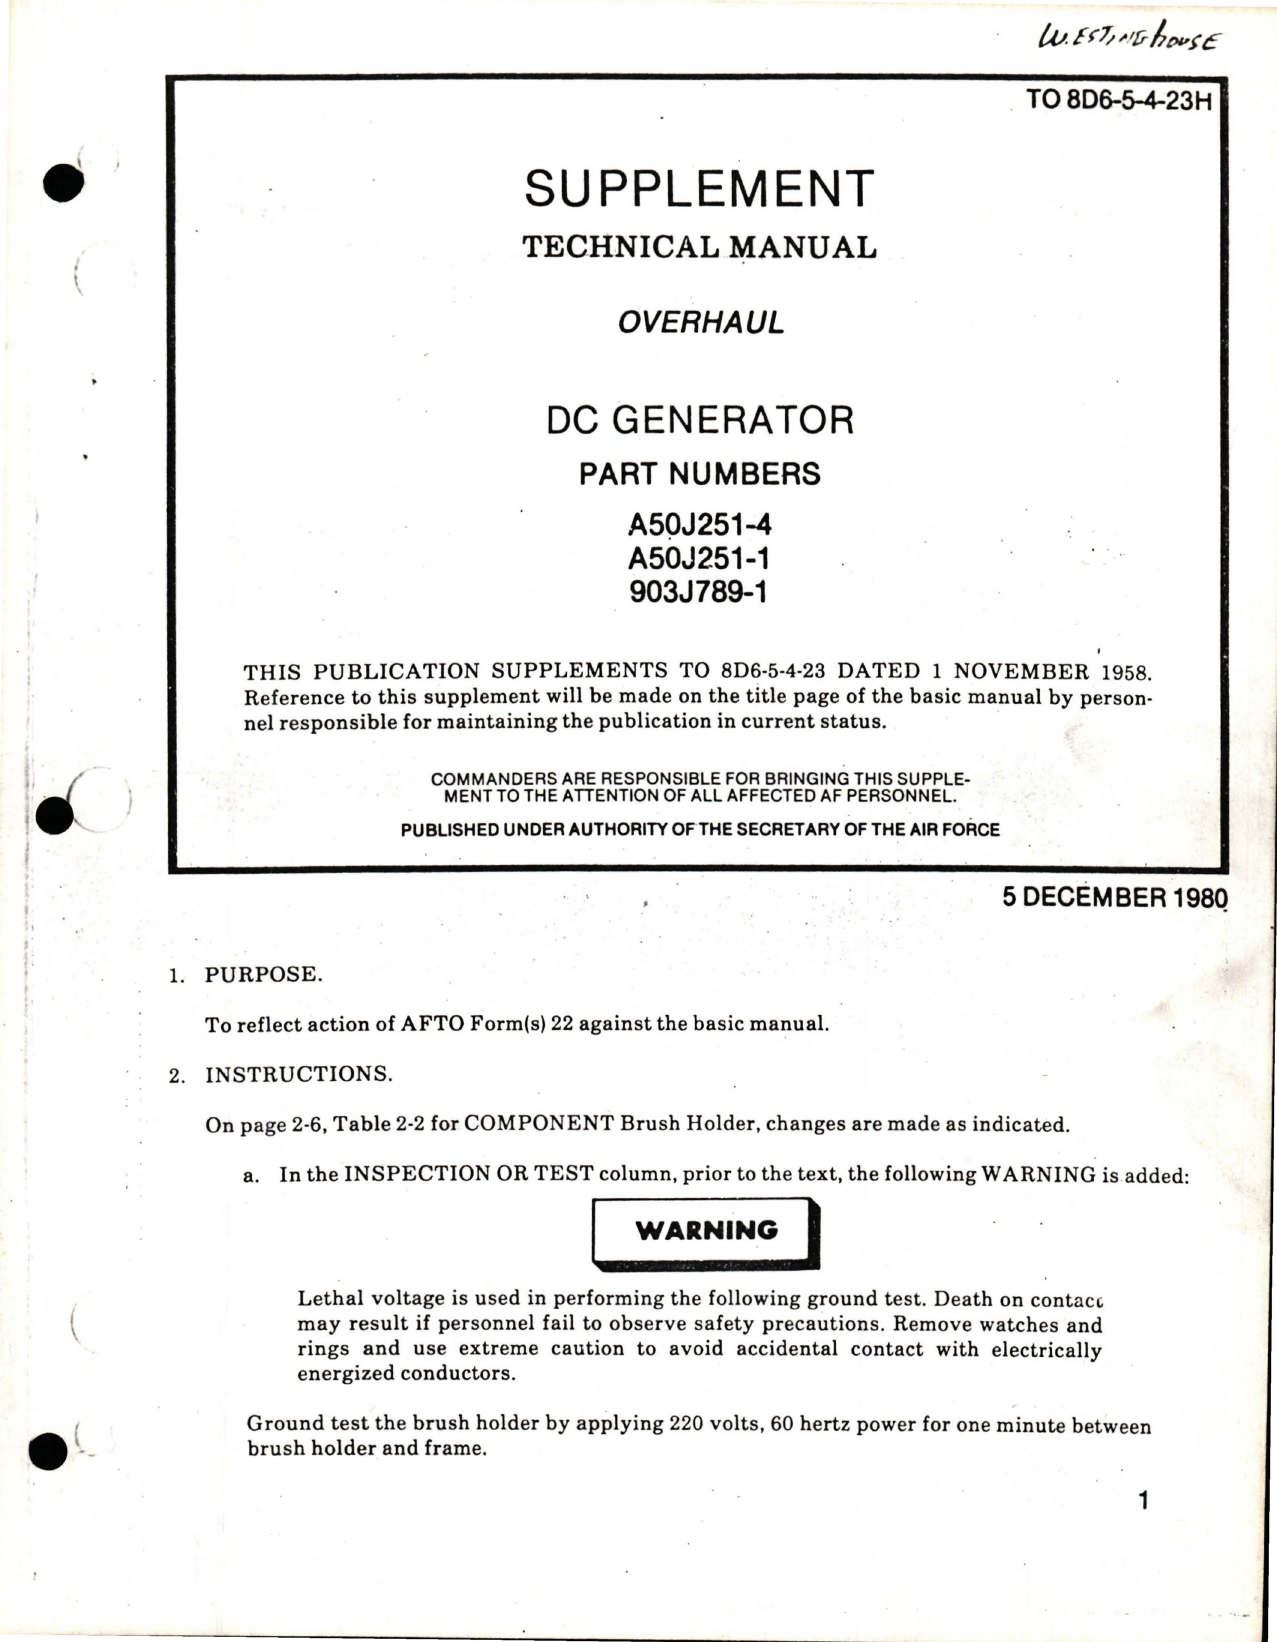 Sample page 1 from AirCorps Library document: Supplement to Overhaul for DC Generator - Parts A50J251-4, A50J251-1, and 903J789-1